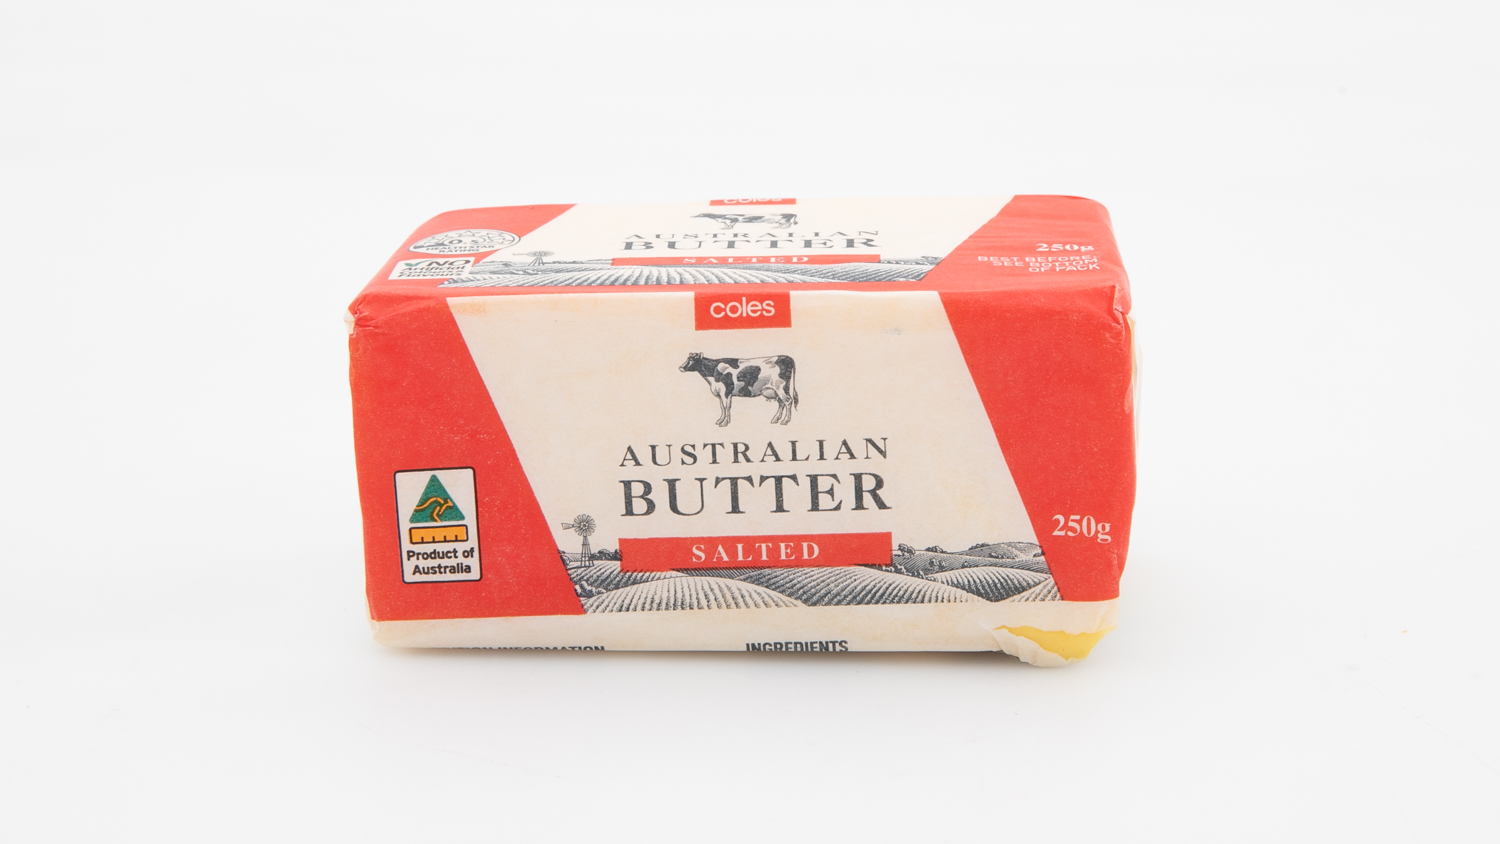 Coles Australian Butter Salted carousel image